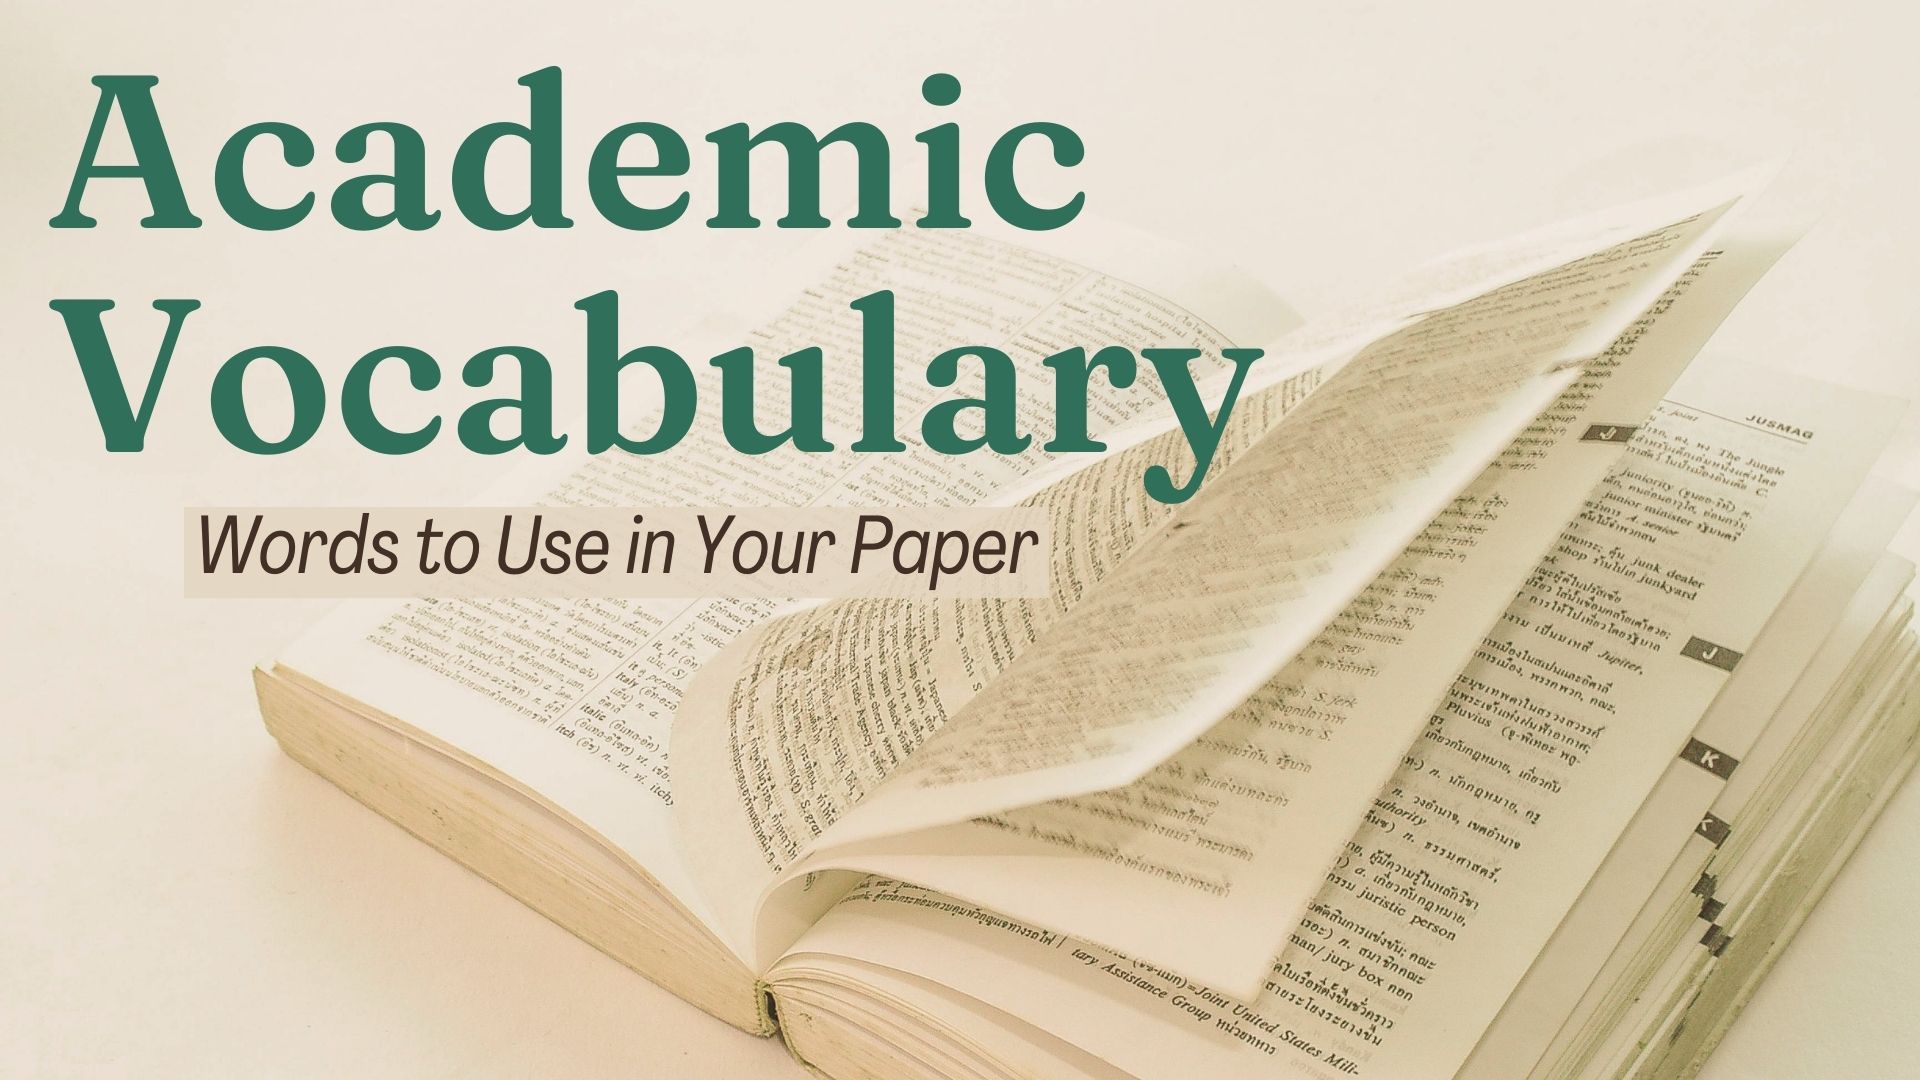 Academic Vocabulary: Words And Phrases To Use In Your Papers